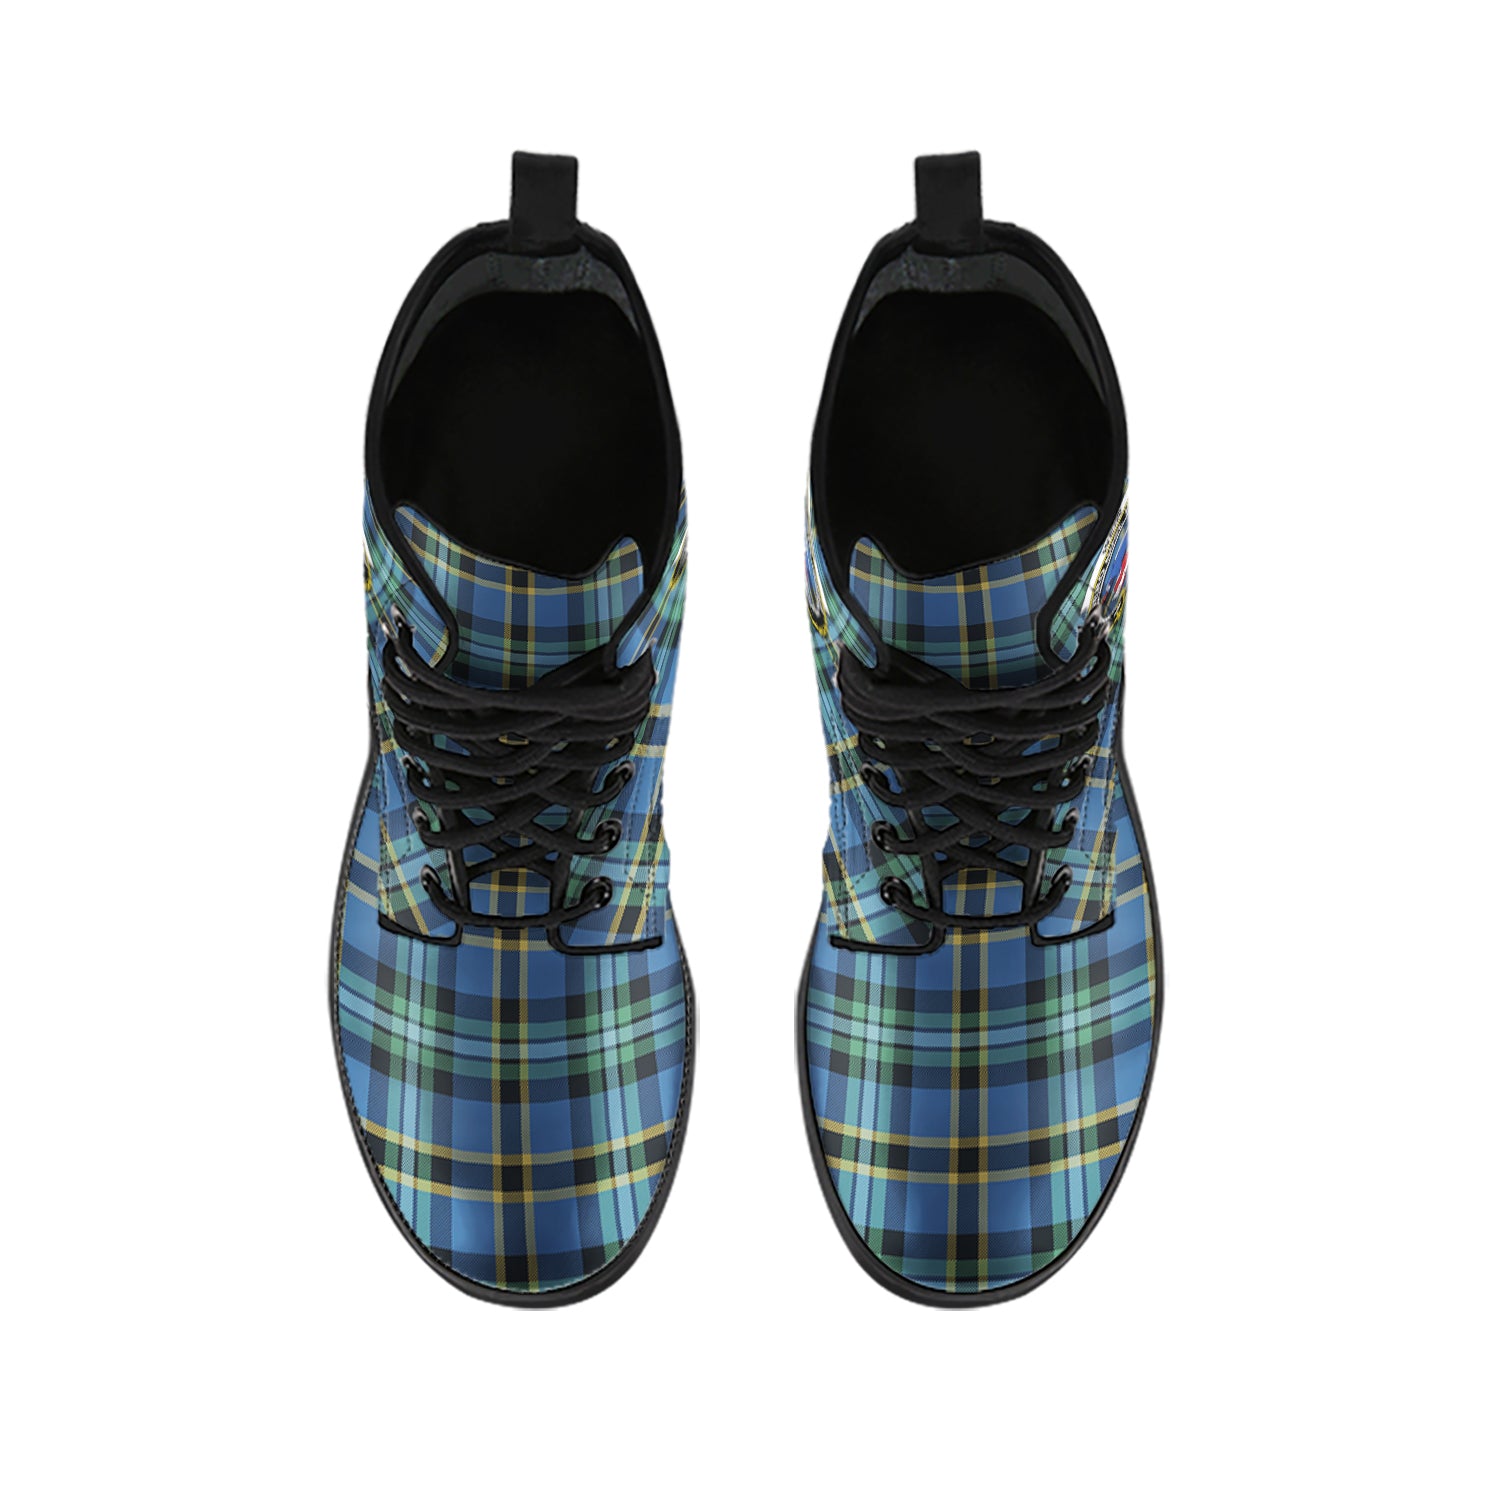 weir-ancient-tartan-leather-boots-with-family-crest